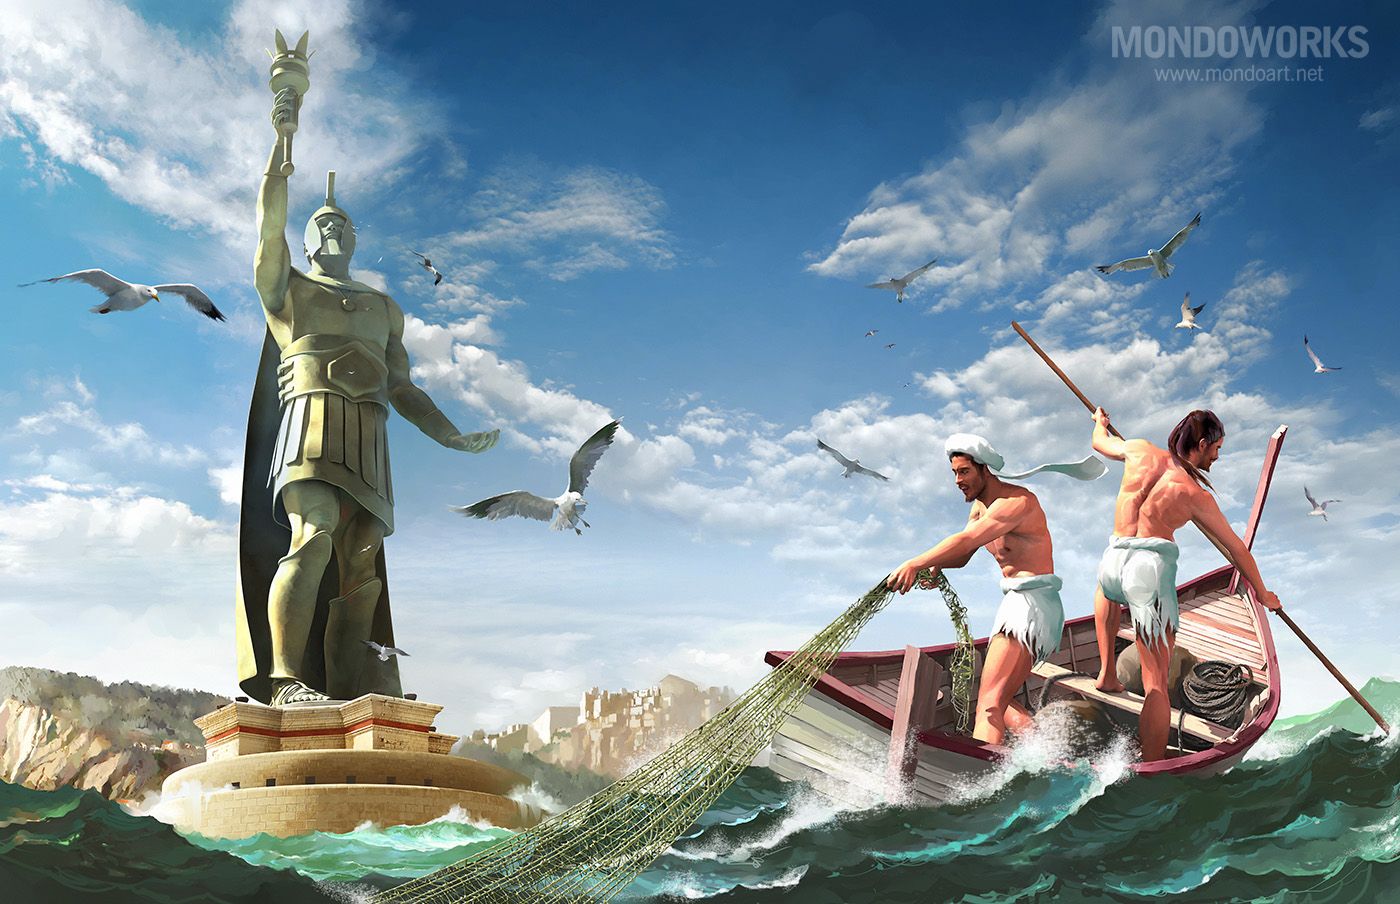 7 Wonders of the World Part 6 - The Colossus of Rhodes. — Steemit